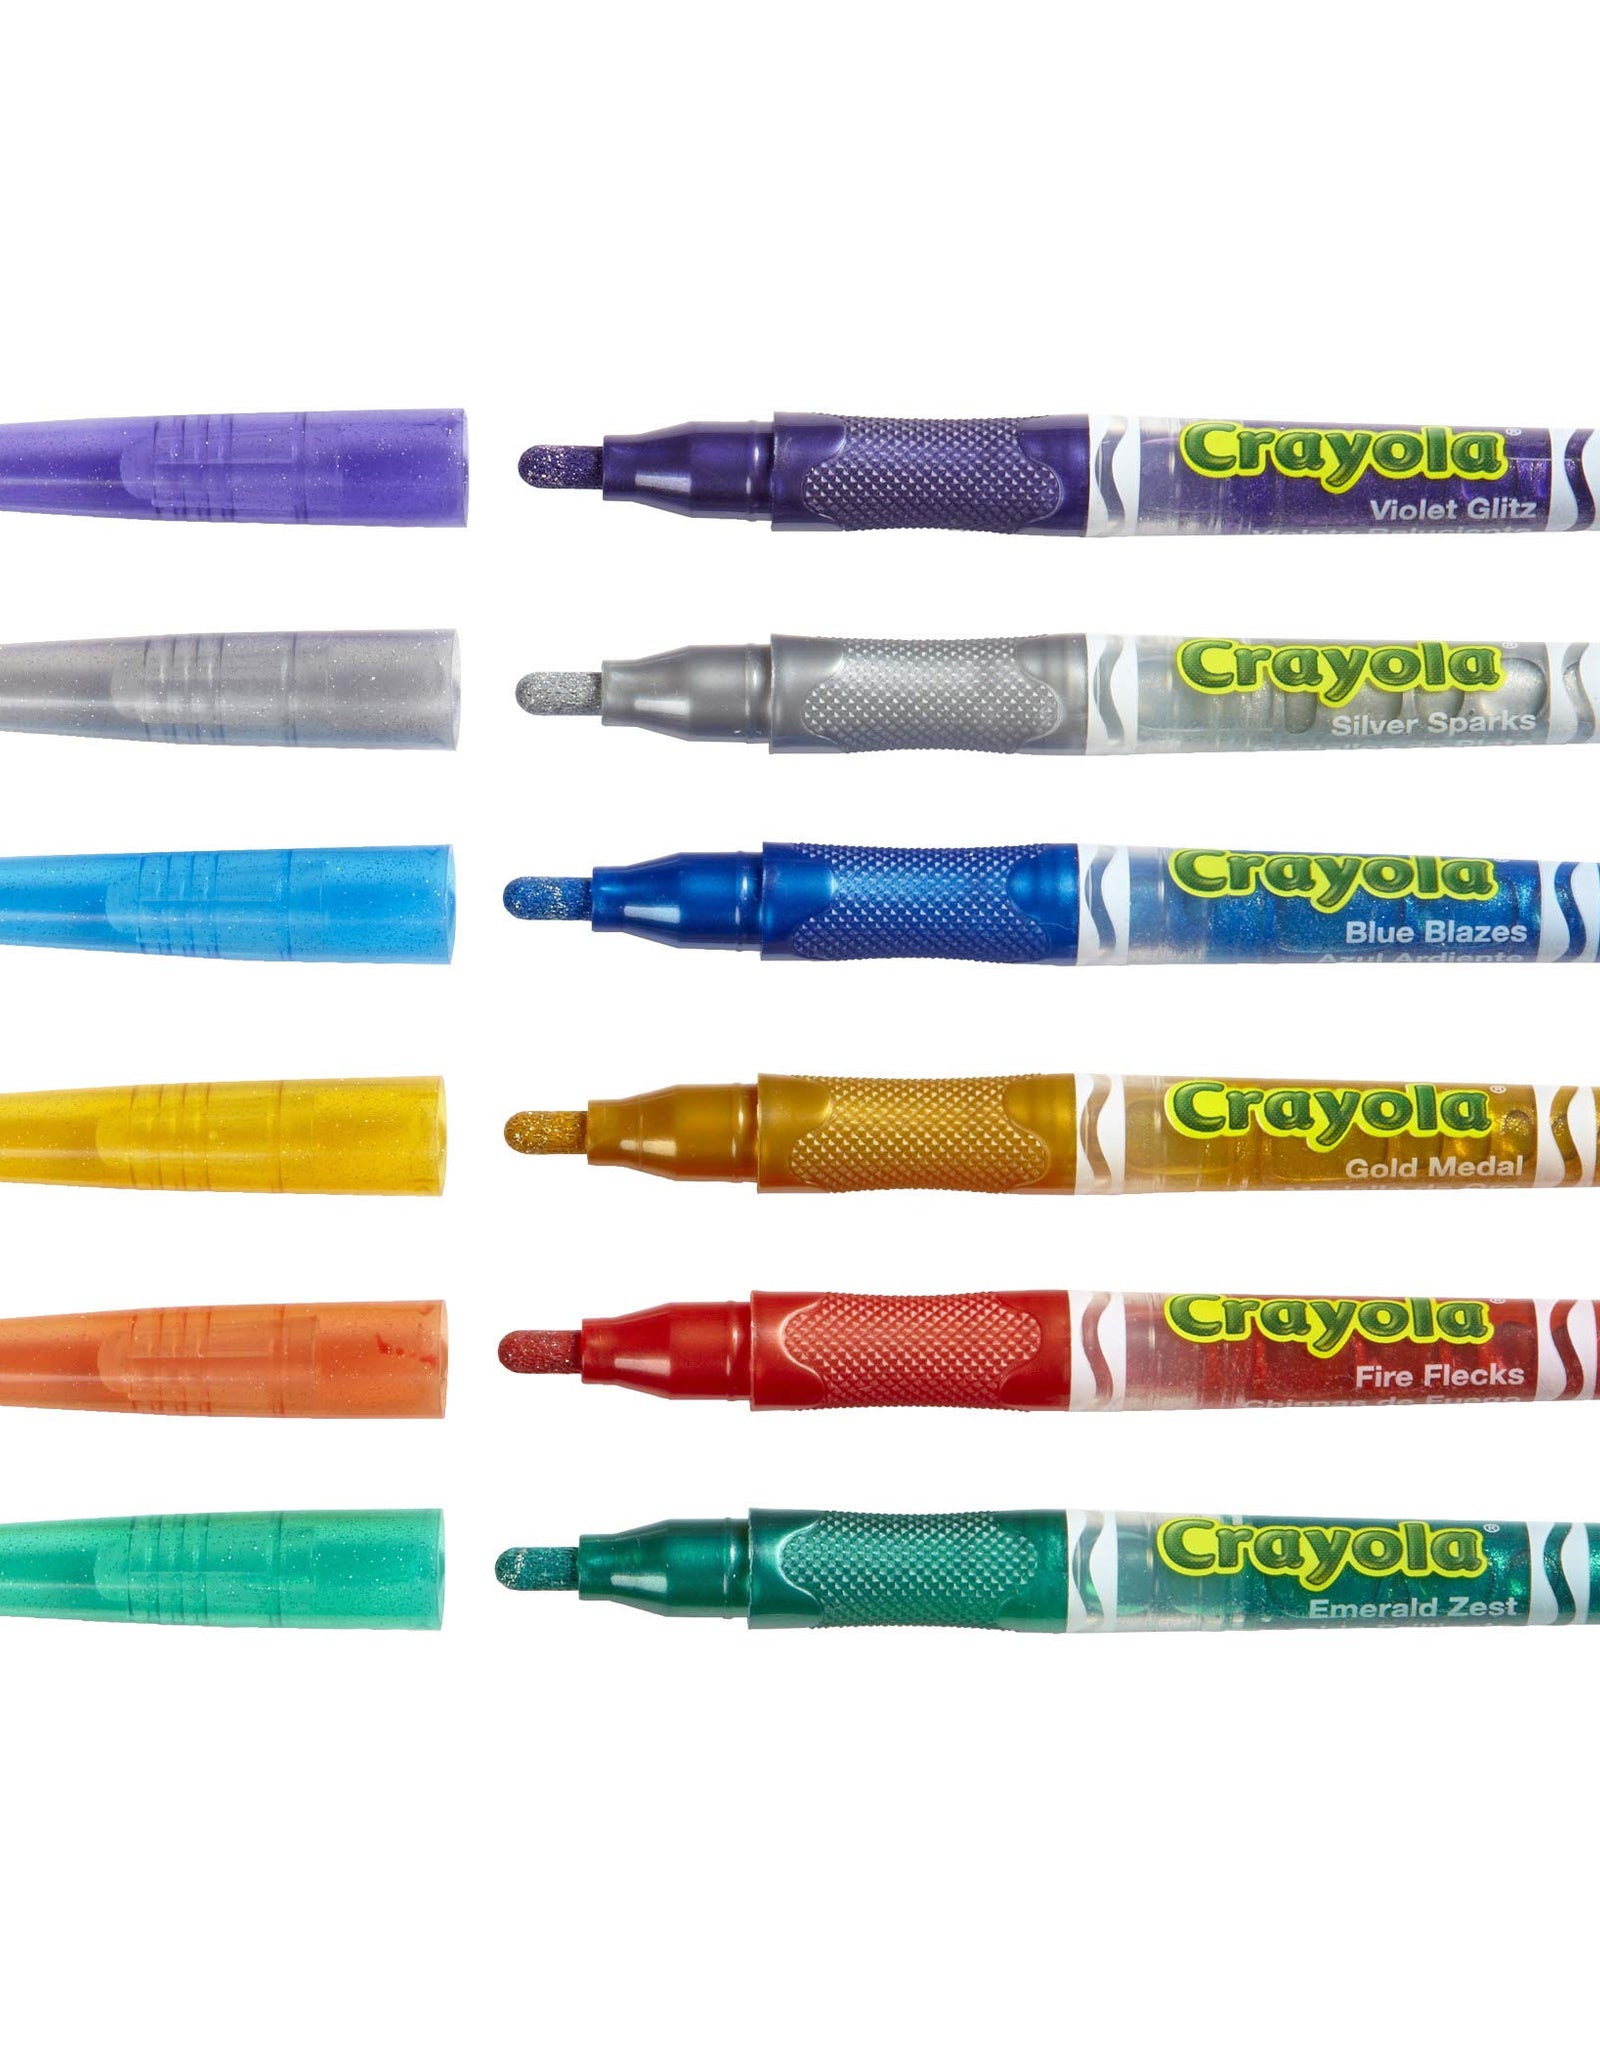 Crayola Glitter Markers, Assorted Colors, Gift, 6 Count (58-8629)